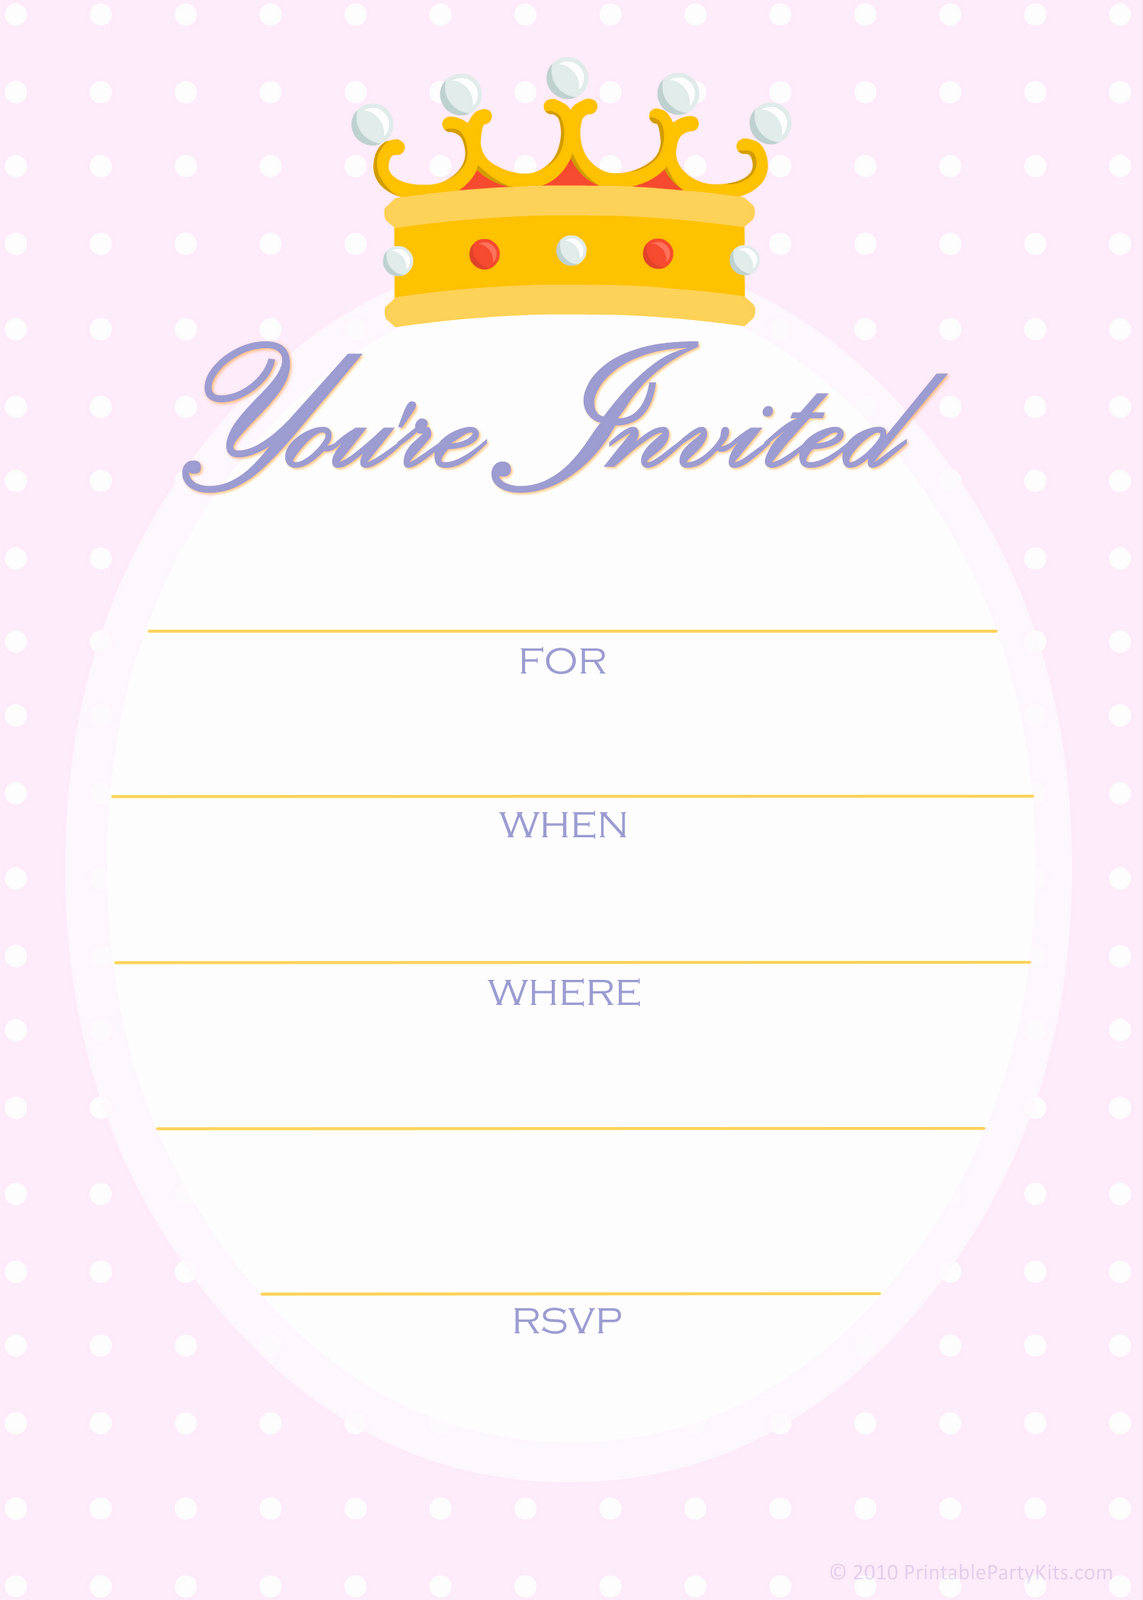 Printable Birthday Invitation Cards Awesome Free Printable Party Invitations Free Invitations for A